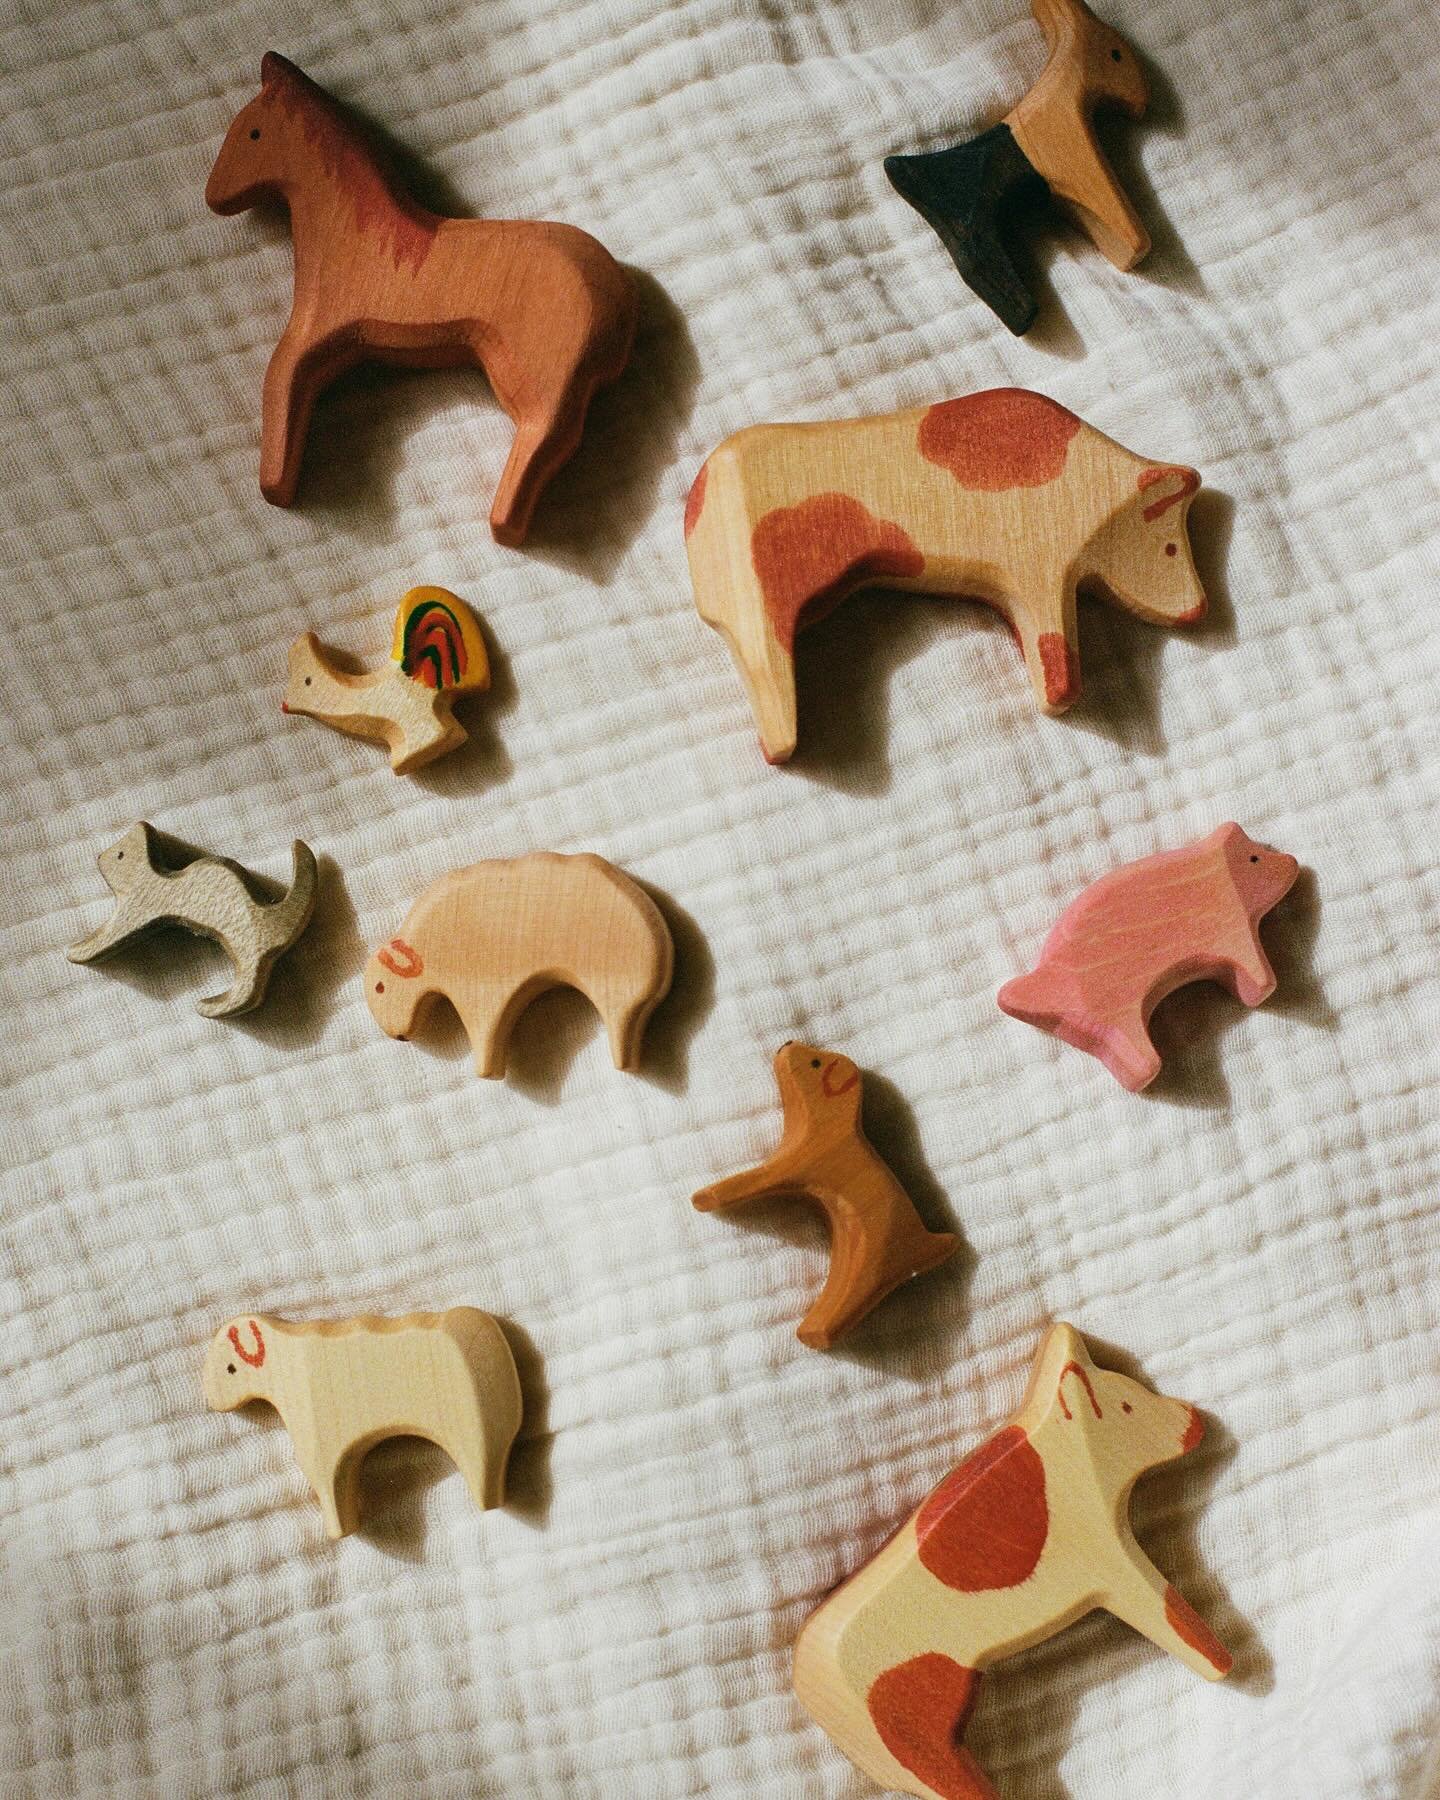 &hellip;NEWS! high quality hand-crafted wooden farm animals
they are so unique and made to be collect and cherished 🫶🏼 online now!! photo by: @katrinemoebius #boefshopcopenhagen